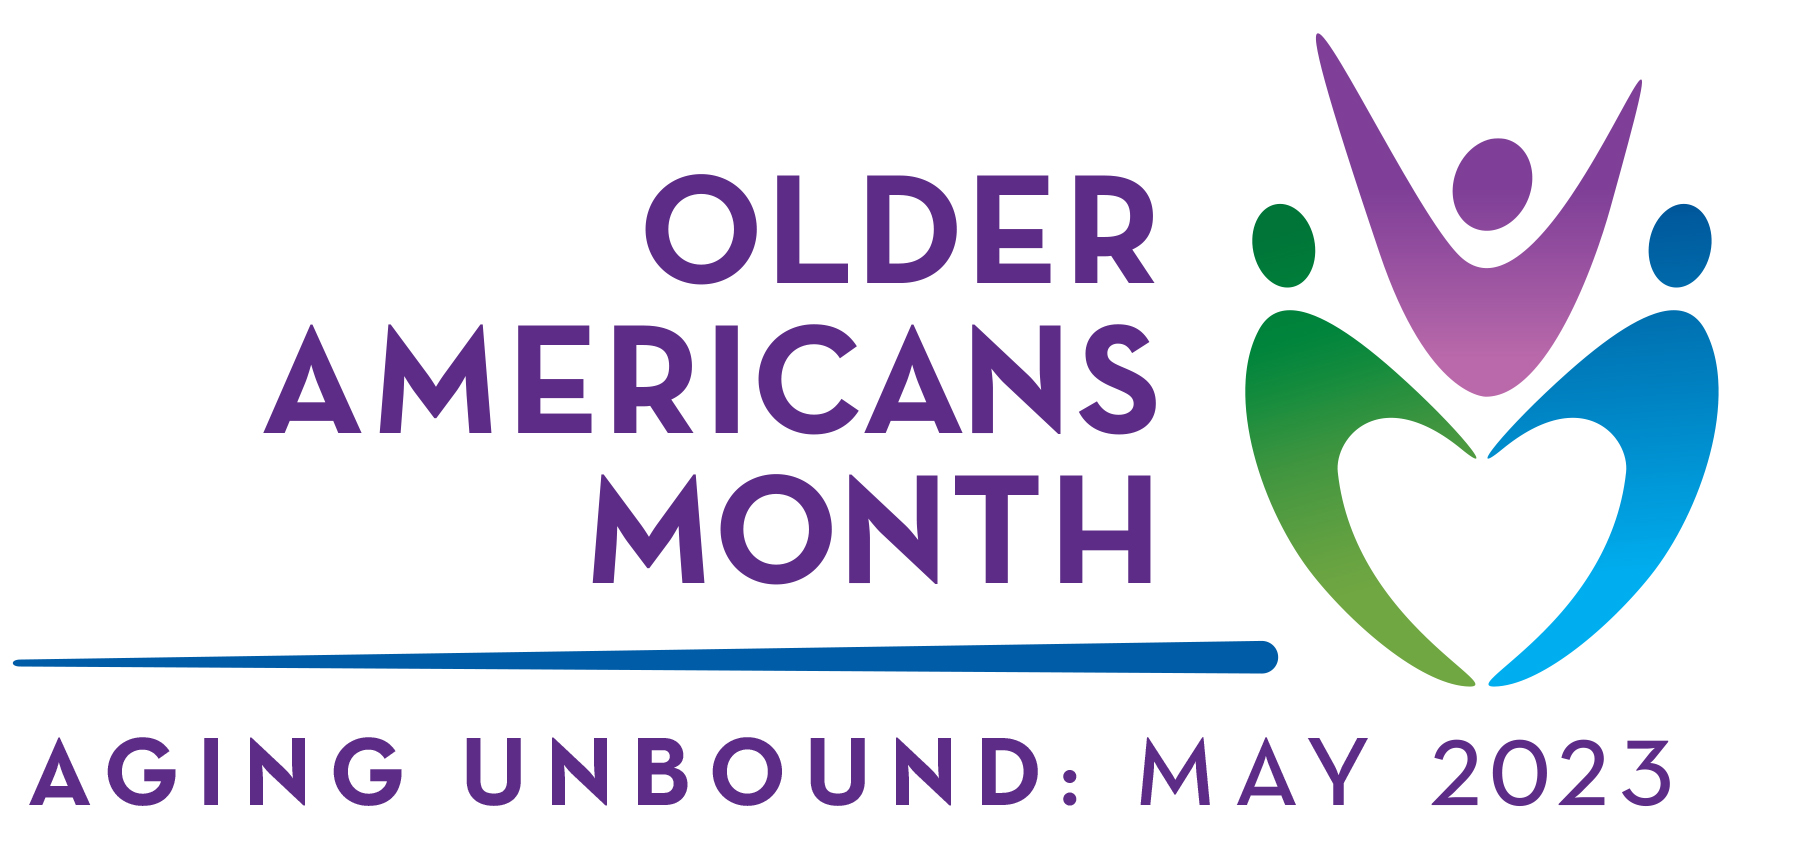 Older Americans Month. Aging Unbound: May 2023